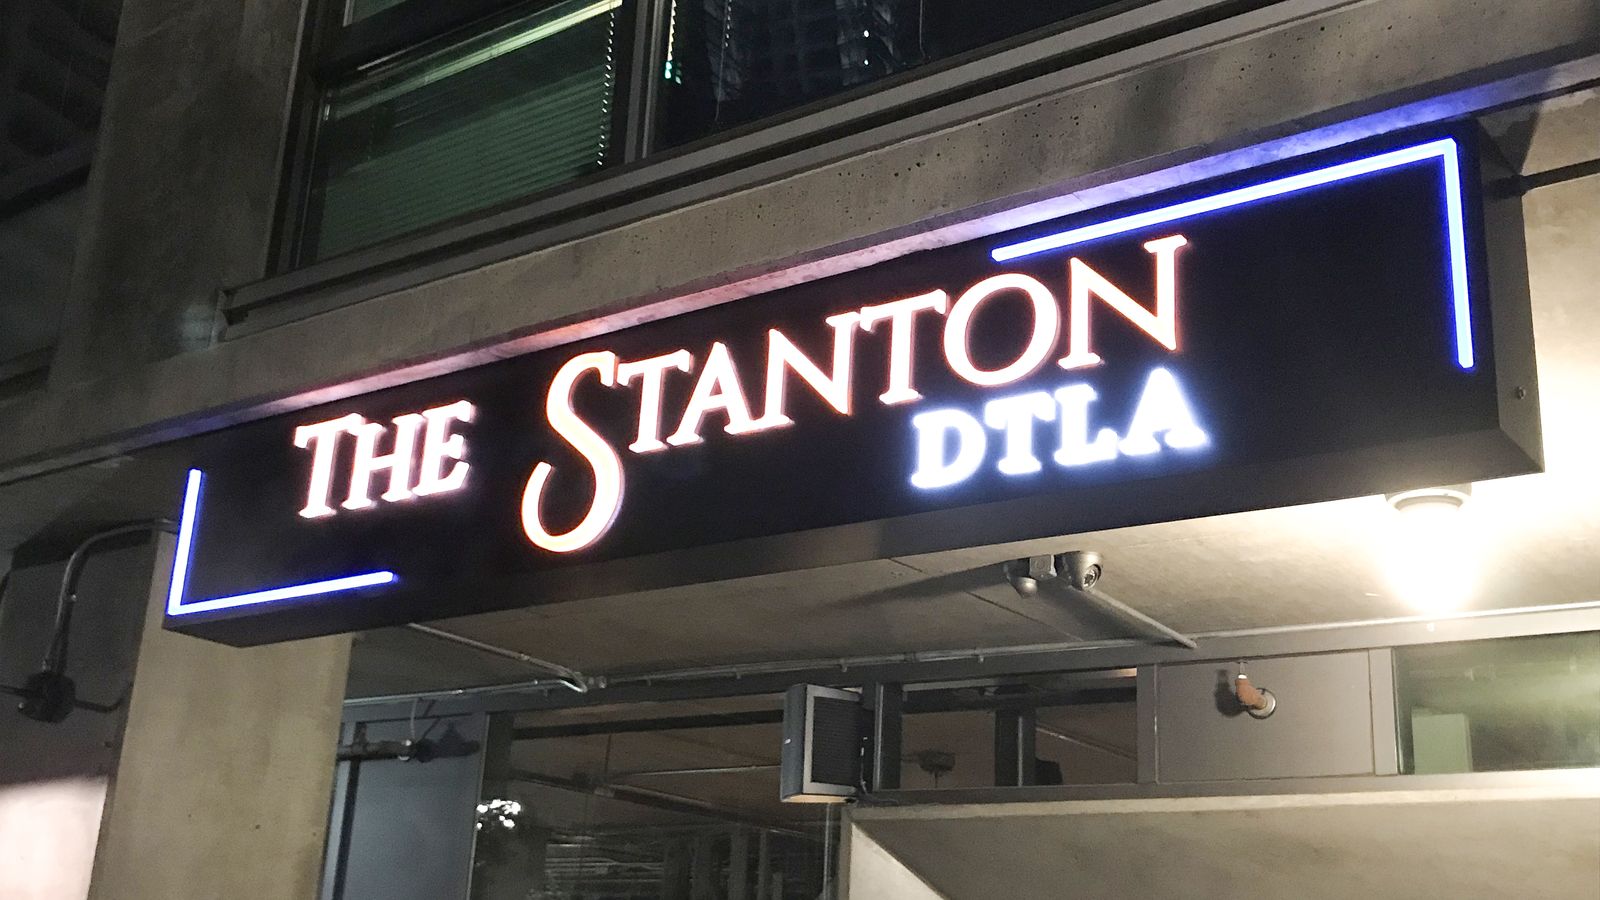 The Stanton DTLA large light box in an awning style made of aluminum and acrylic for branding